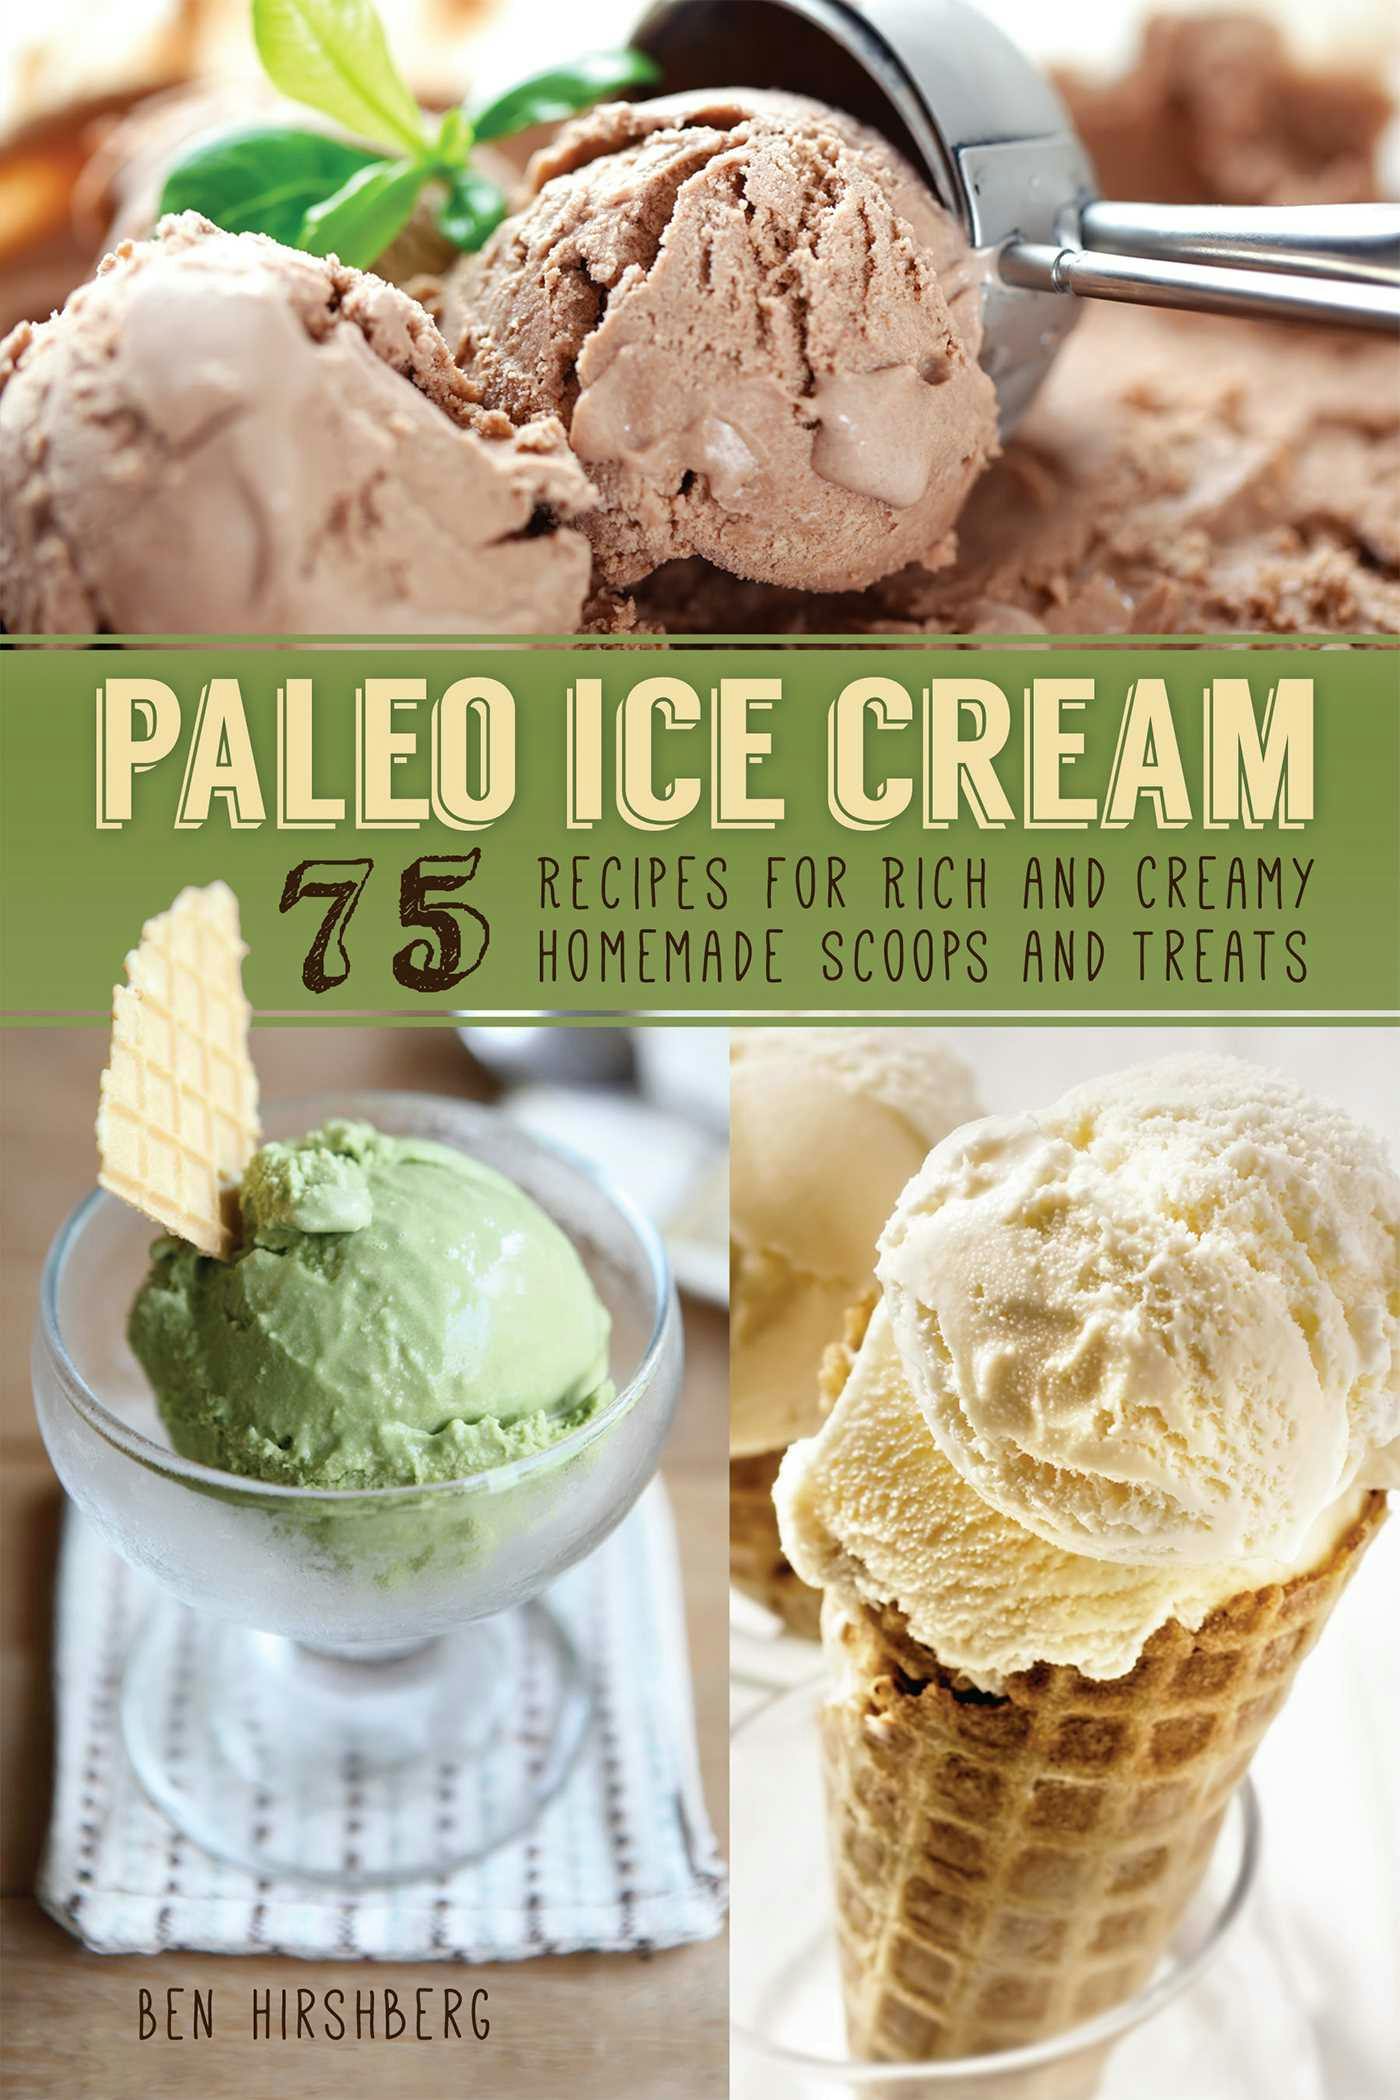 Paleo Ice Cream: 75 Recipes for Rich and Creamy Homemade Scoops and Treats - undefined